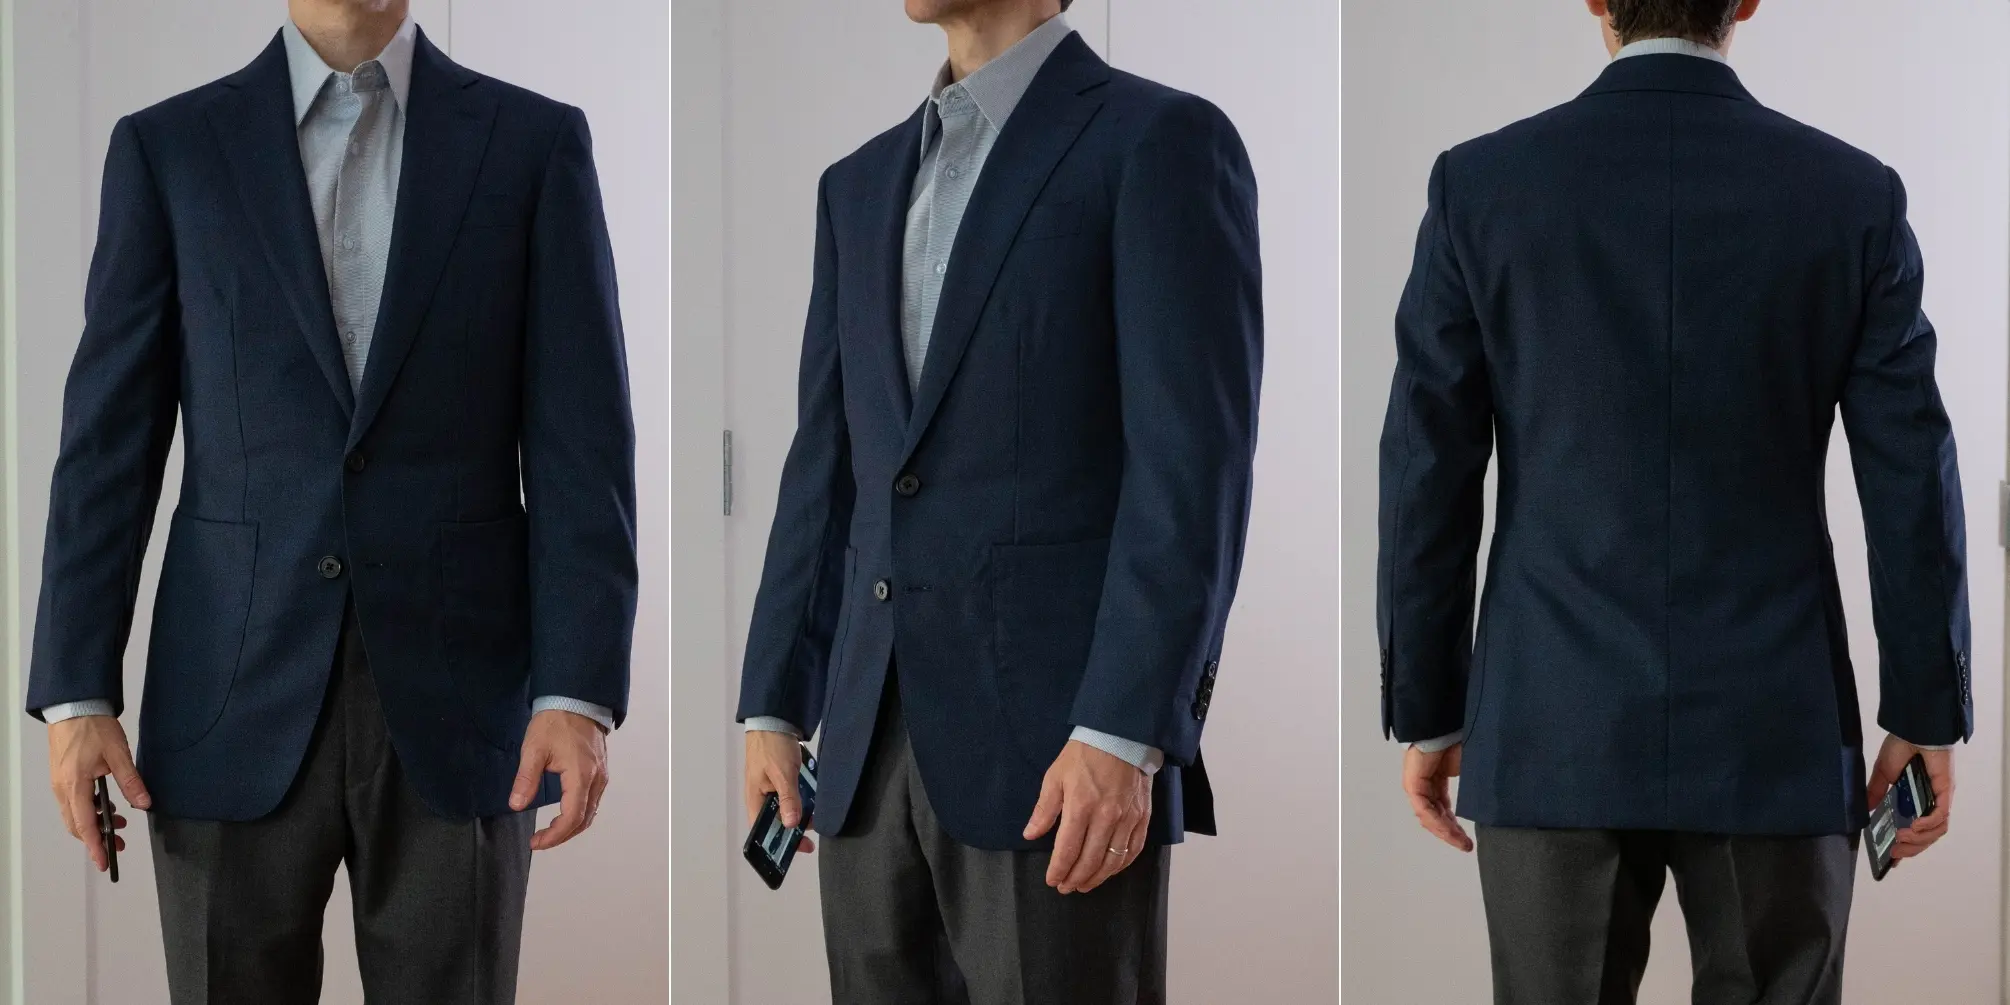 How to Tailor a Suit Jacket, Sport Coat or Blazer (With Prices)